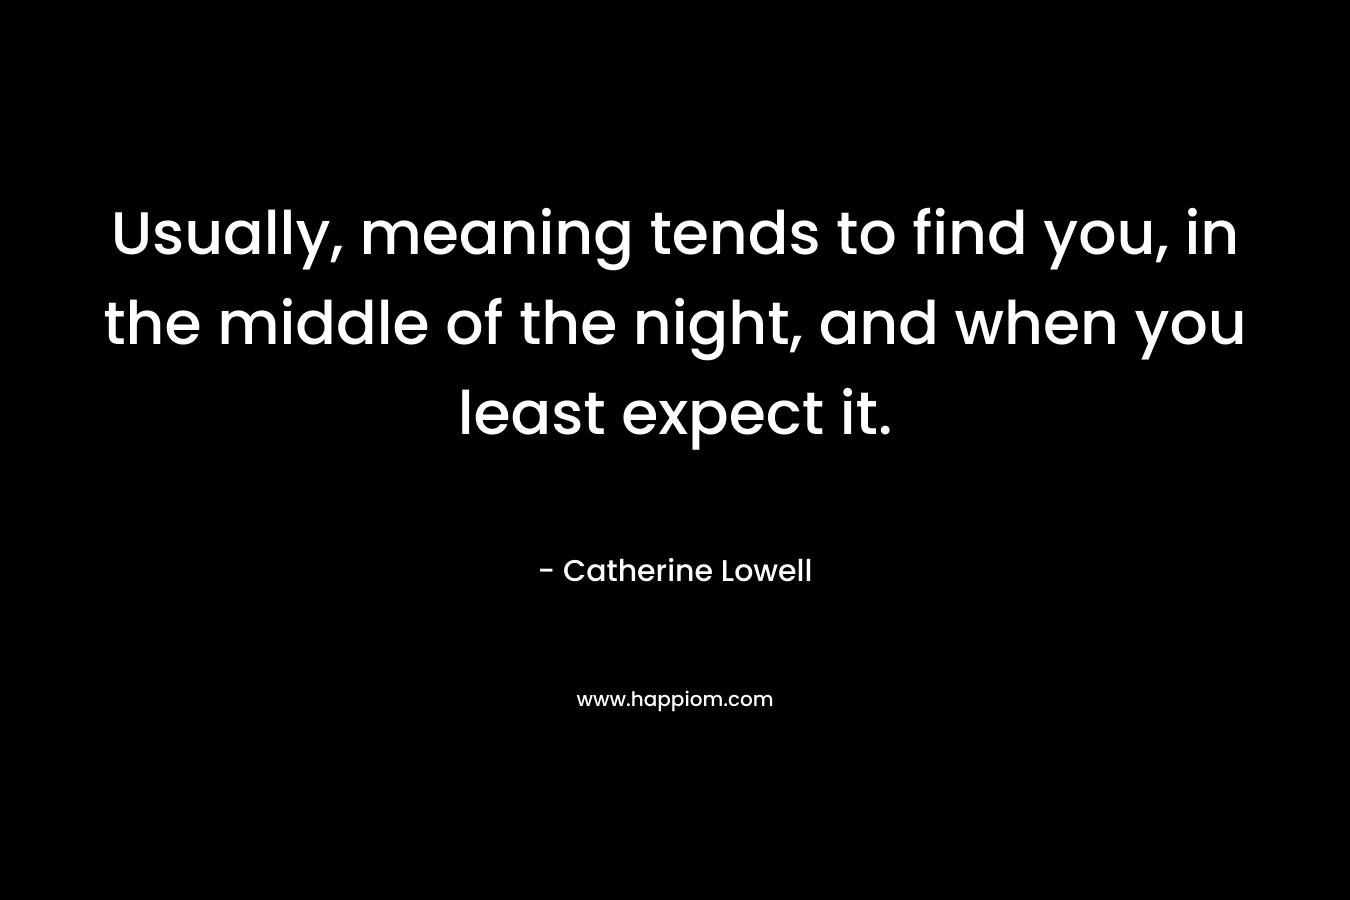 Usually, meaning tends to find you, in the middle of the night, and when you least expect it.